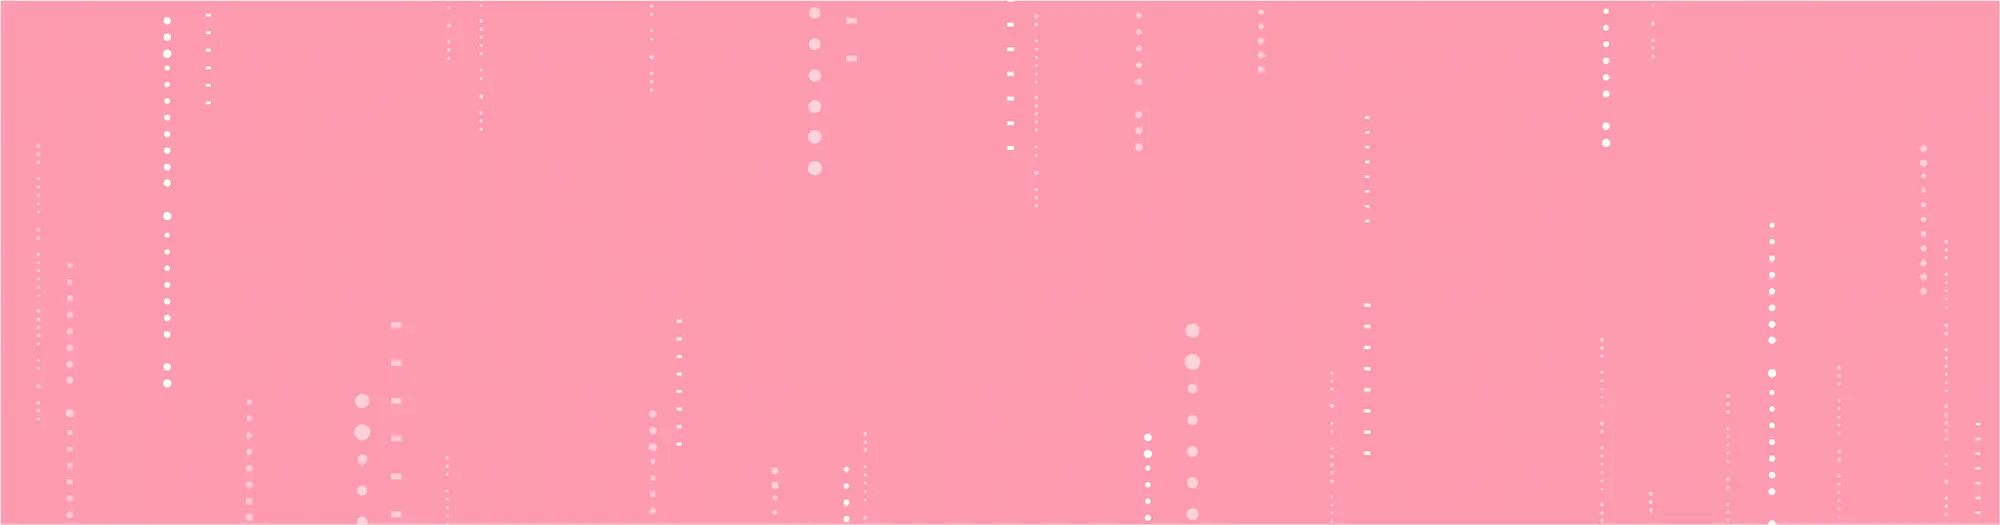 Pink background image with straight dotted line